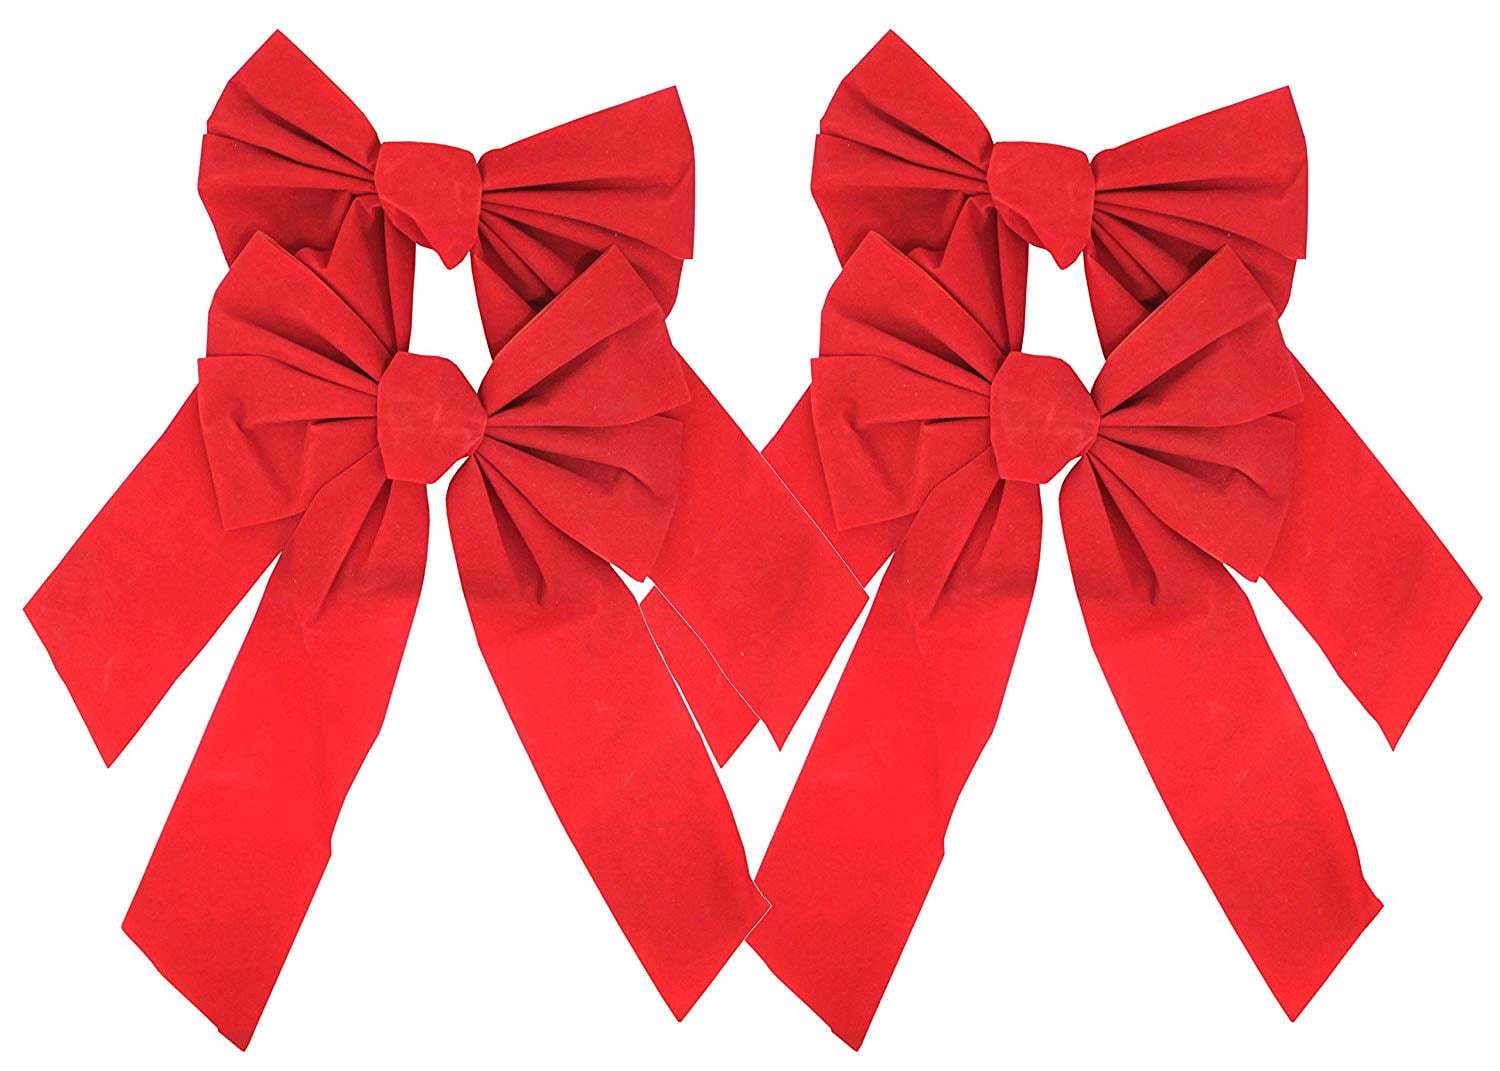 Good Old Values Red Velvet Christmas Bow 9-inch X 16-inch 4 Pack of Holiday  Bows